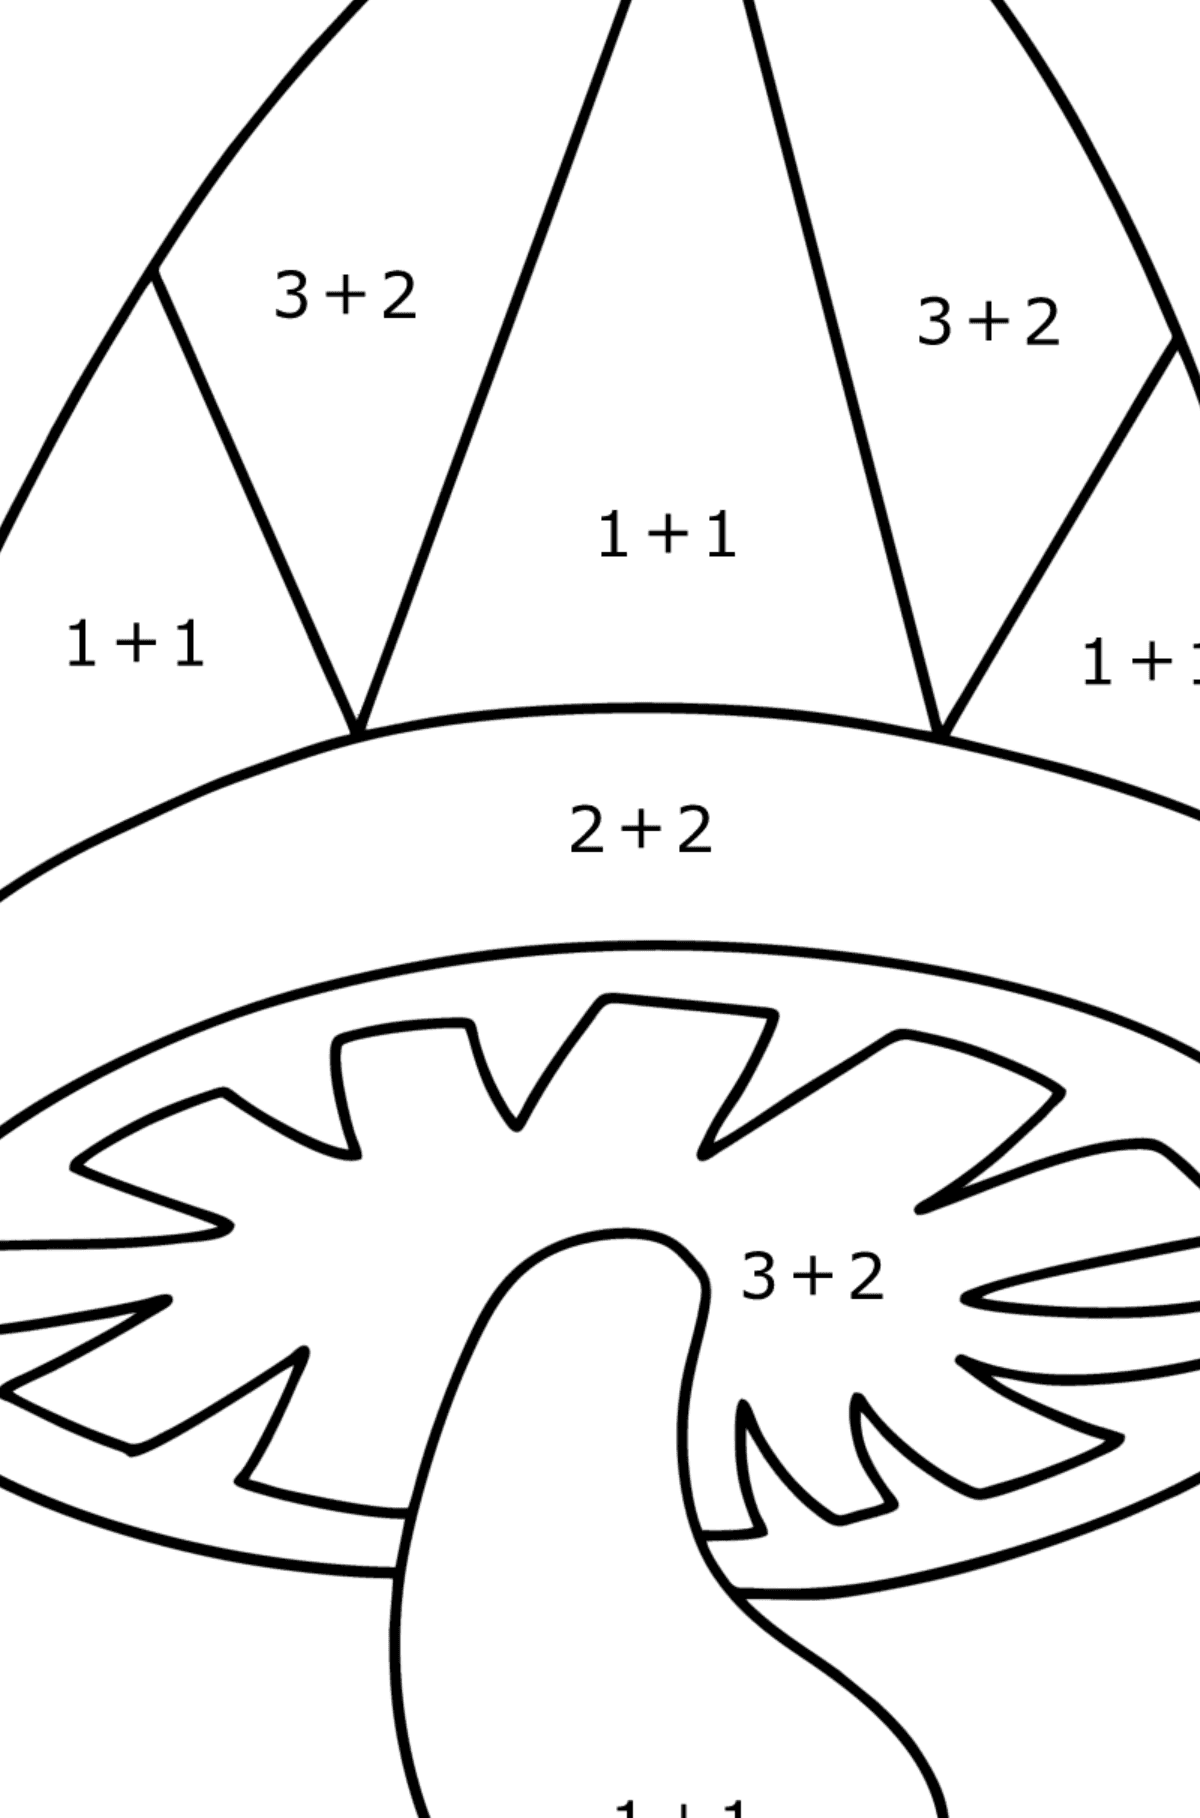 Simple Zen mushroom coloring page - Math Coloring - Addition for Kids